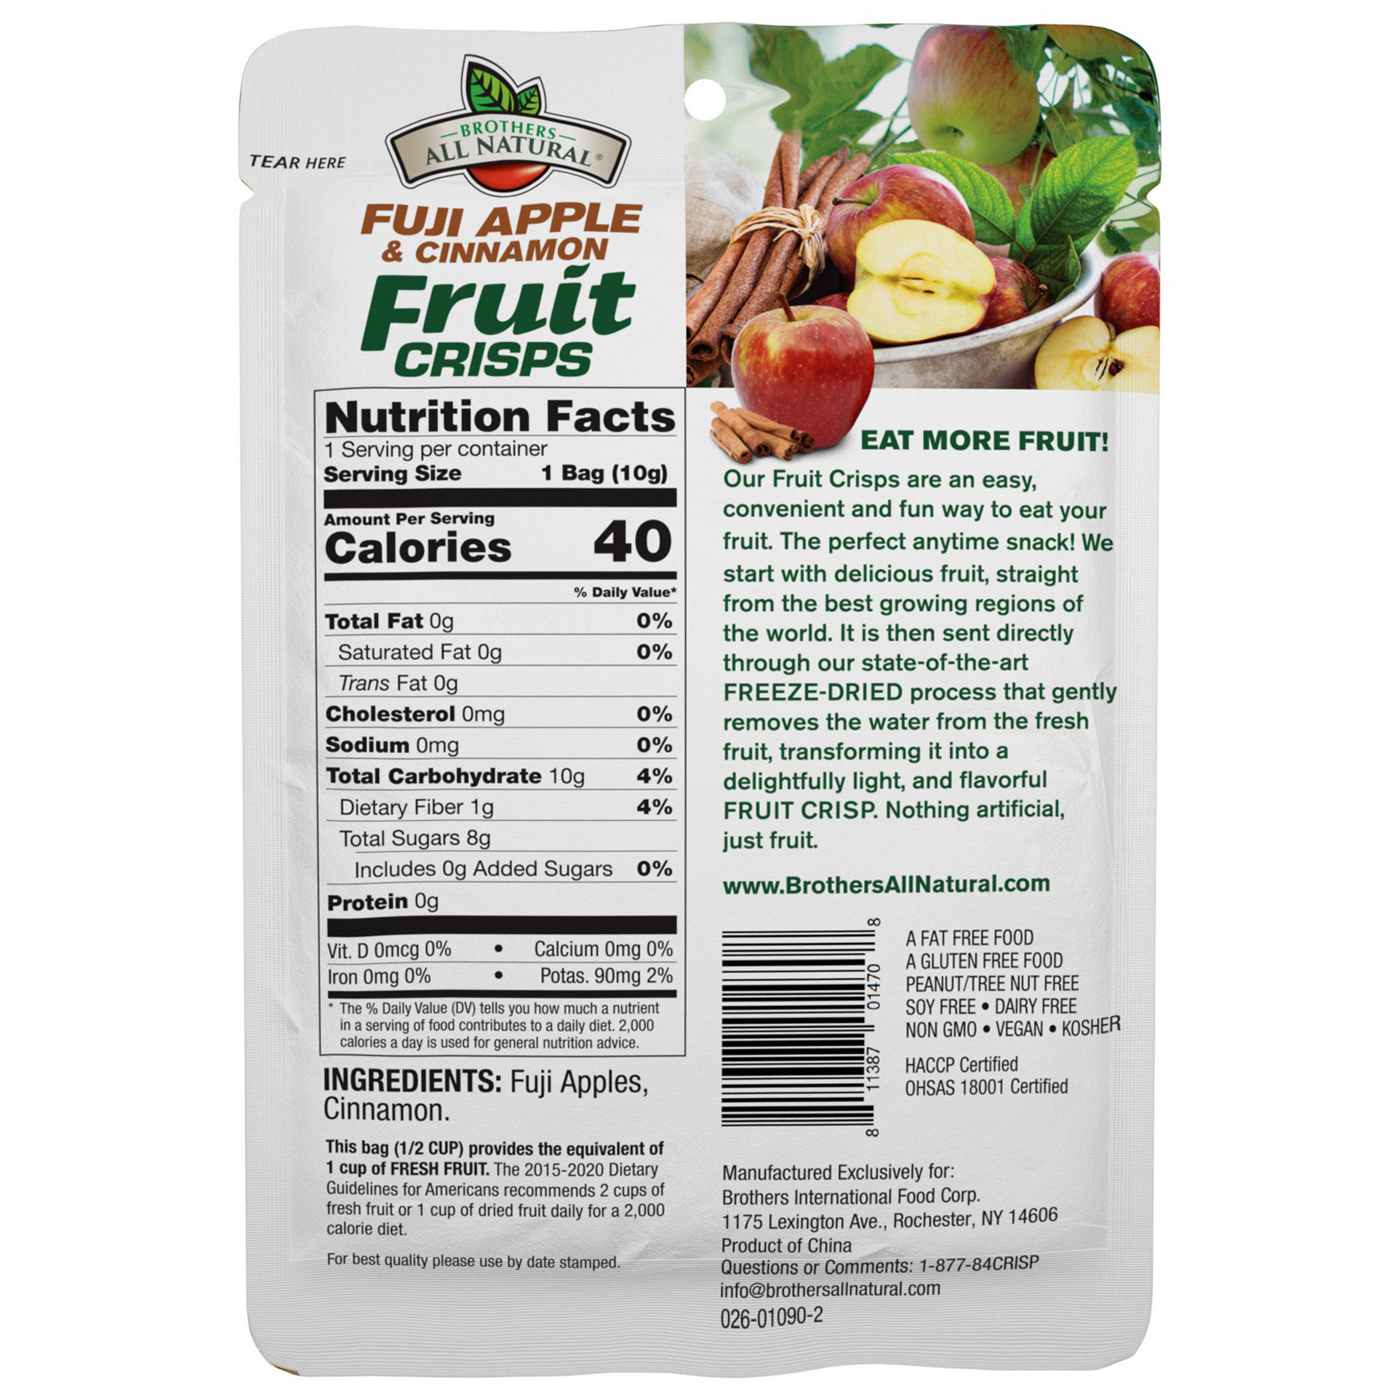 Brothers All Natural Fuji Apple Cinnamon Freeze-Dried Fruit Crisps; image 3 of 3